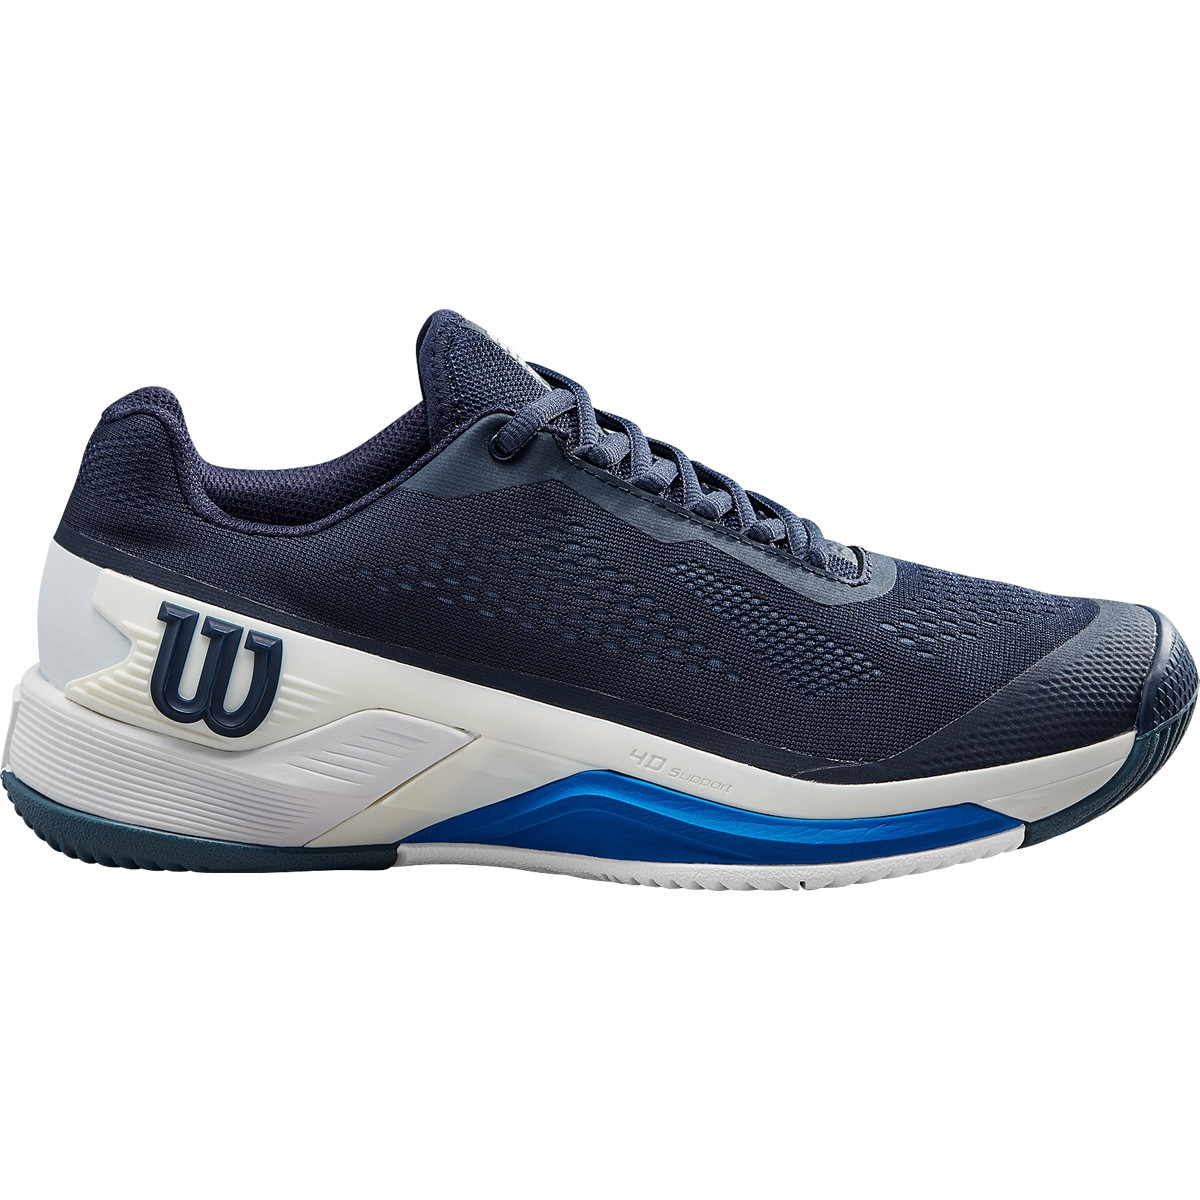 WILSON RUSH PRO 4.0 ALL COURT SHOES